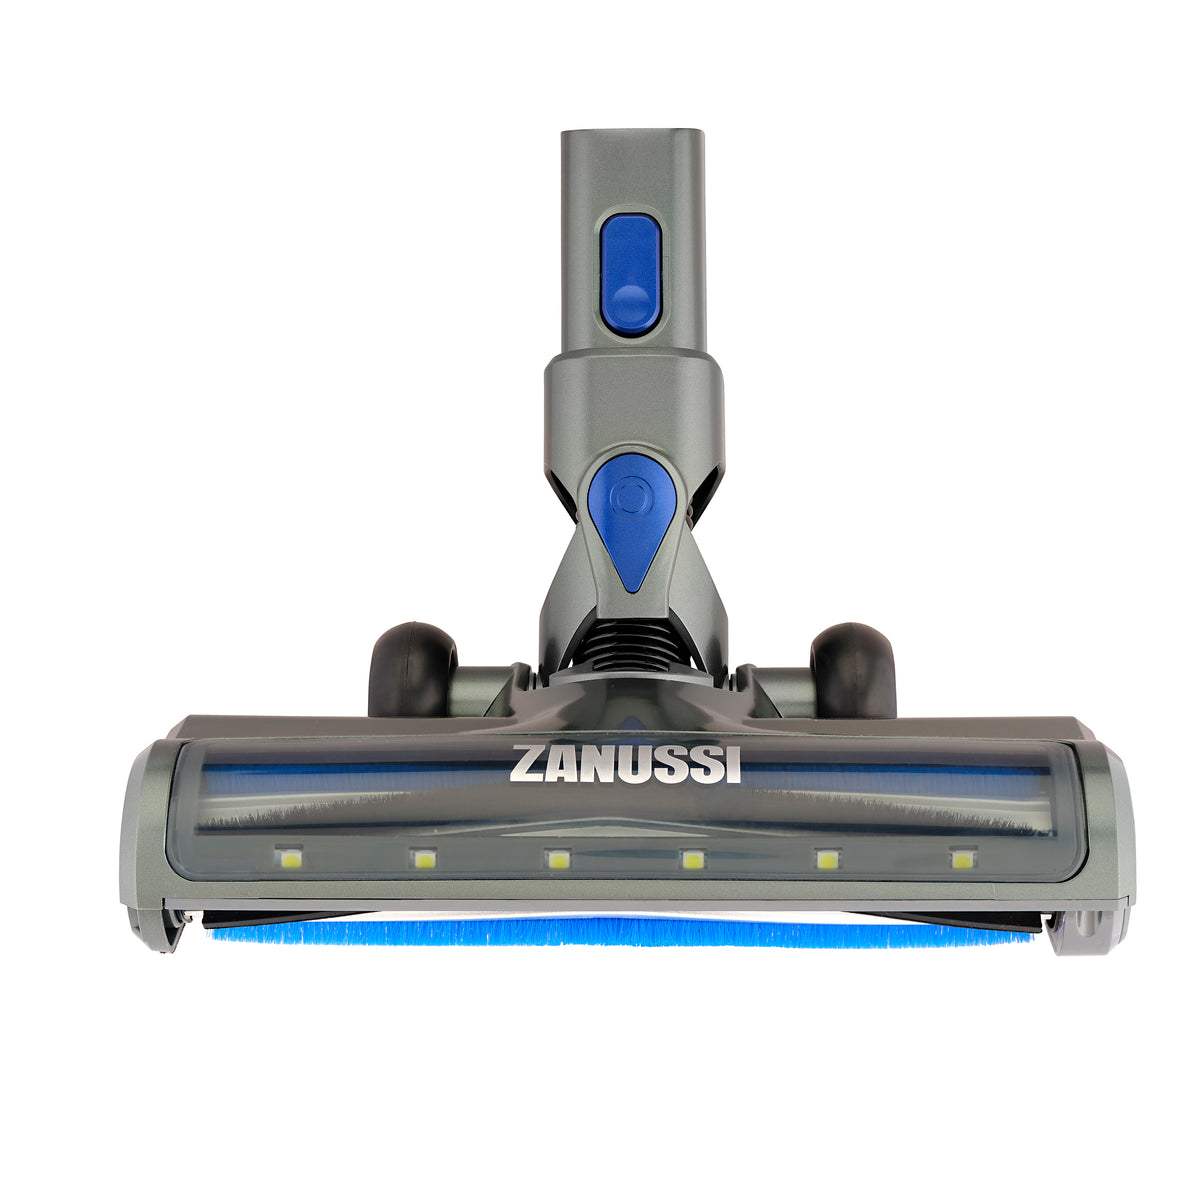 Zanussi 0.5L 3 in 1 Cordless Rechargeable Stick Vacuum Cleaner - Grey &amp; Blue (7608247025852)